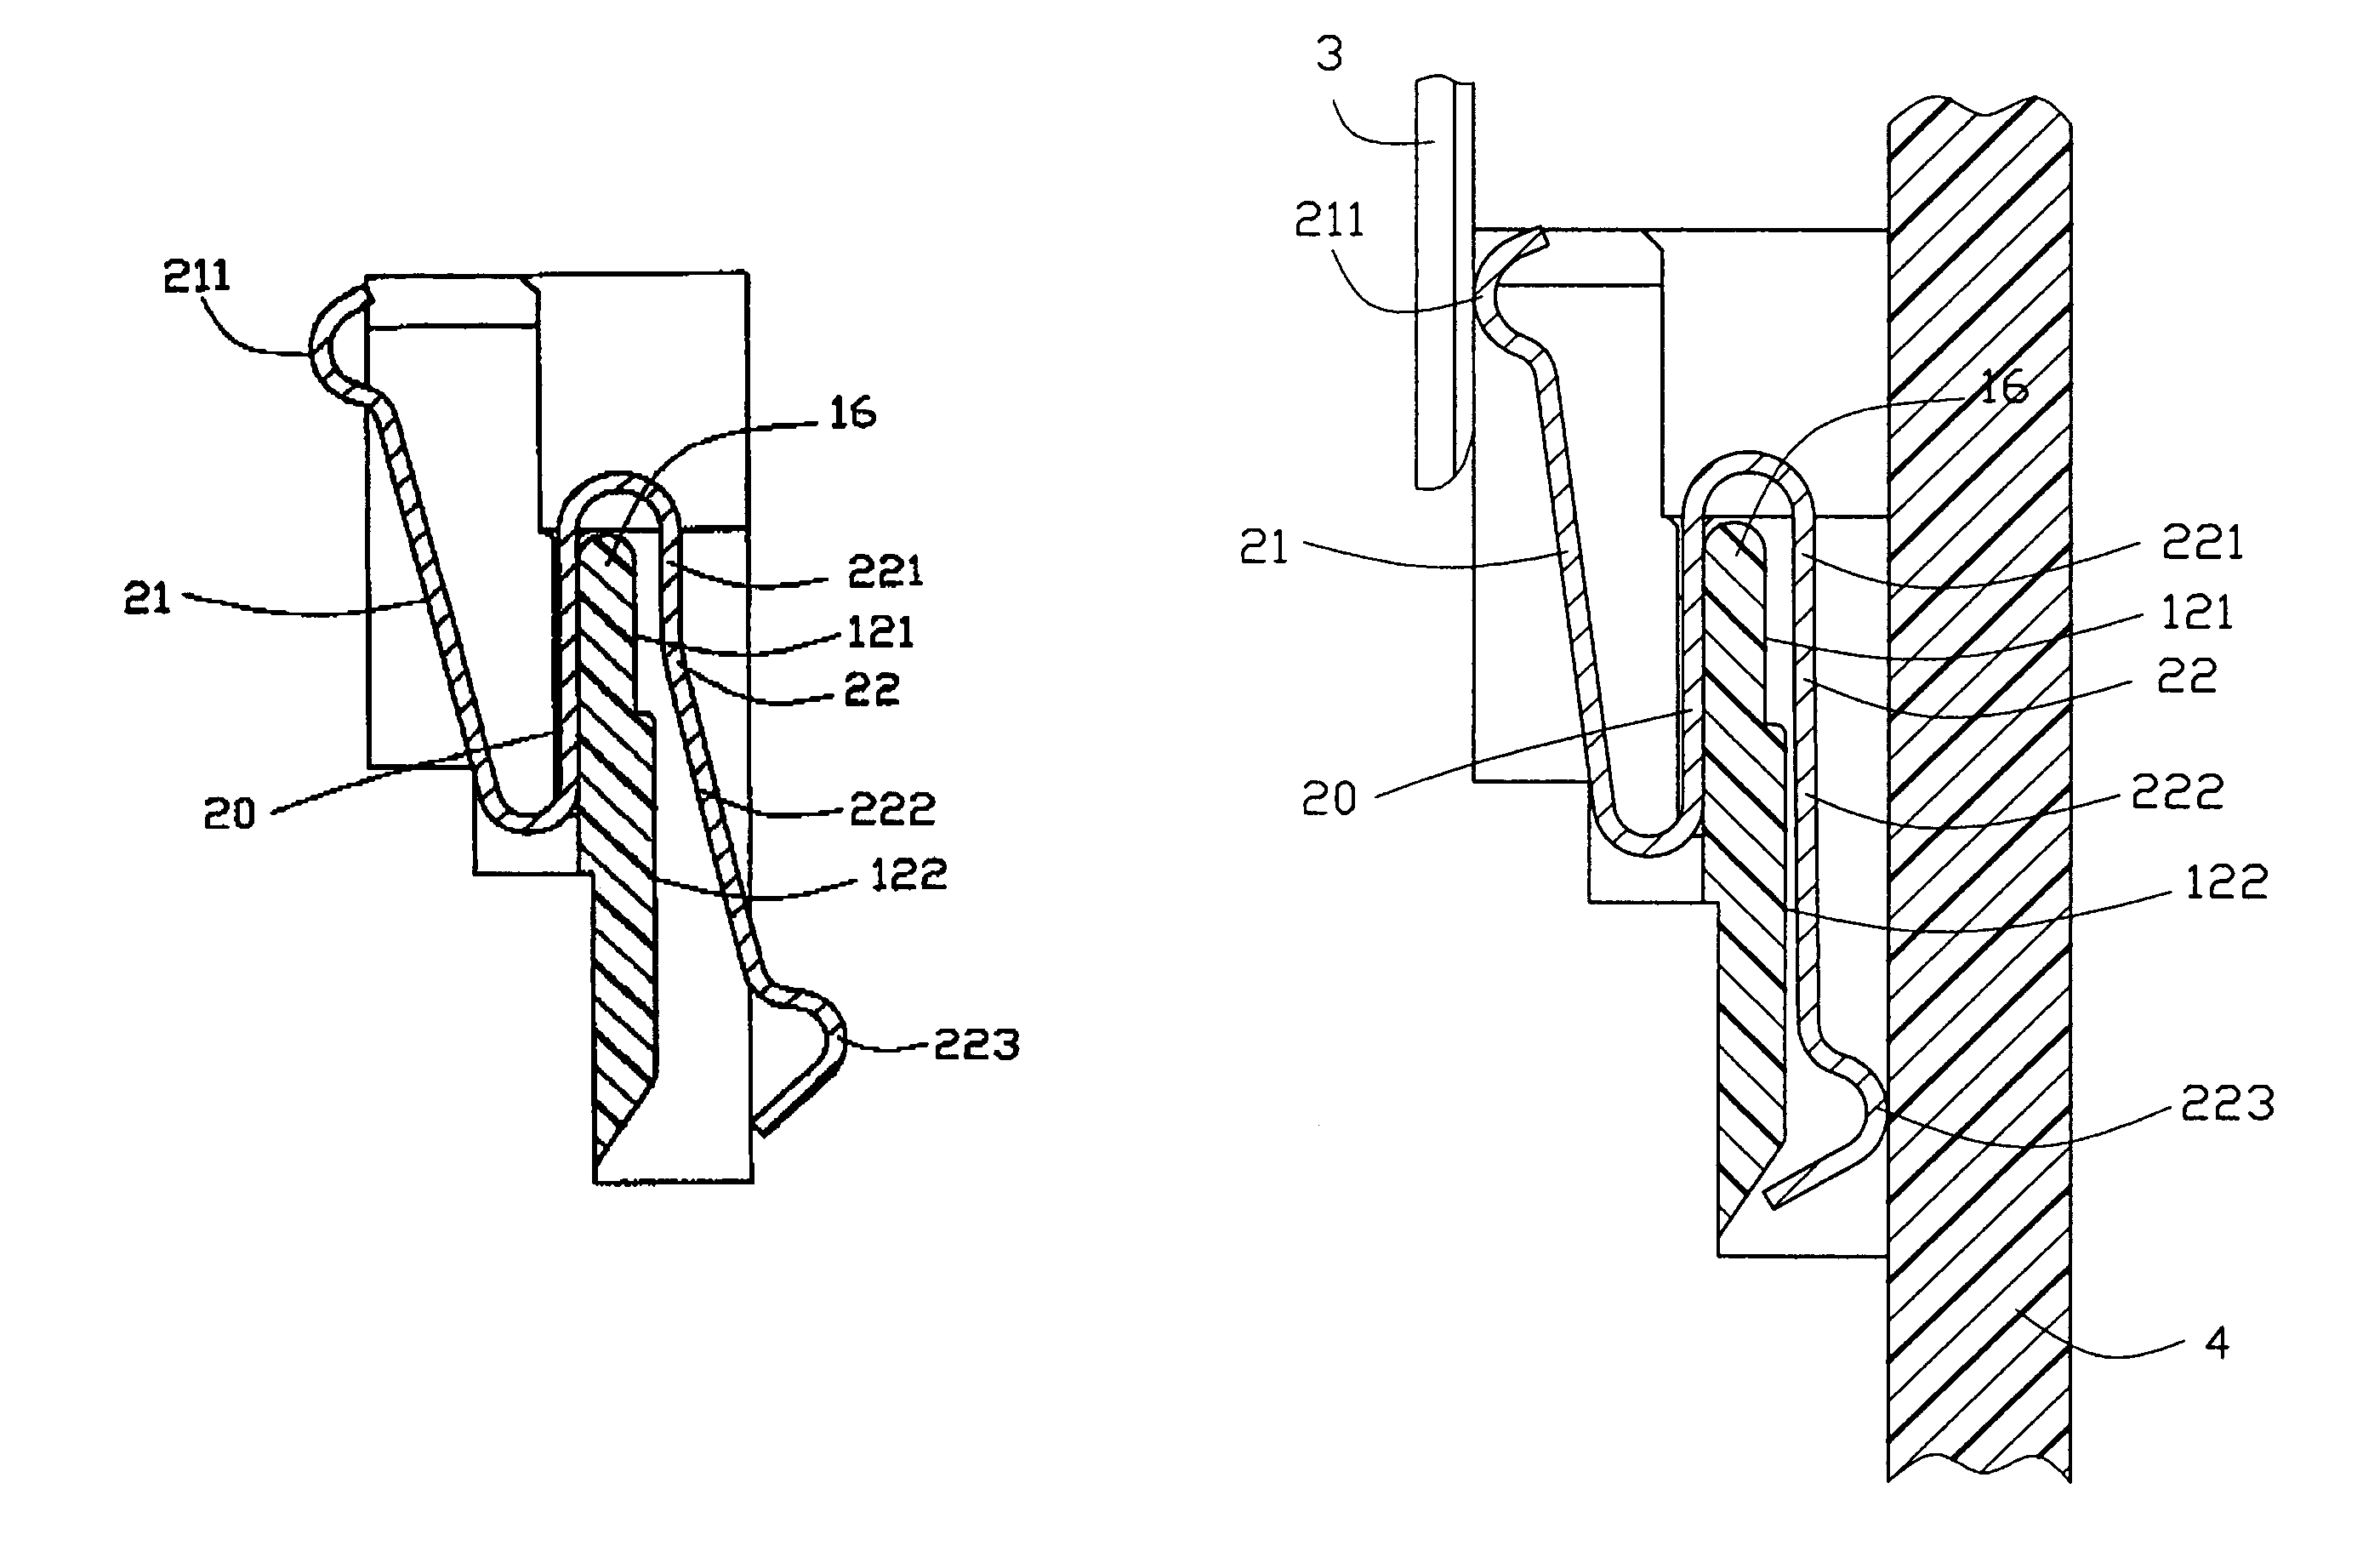 Electrical connector having improved contact